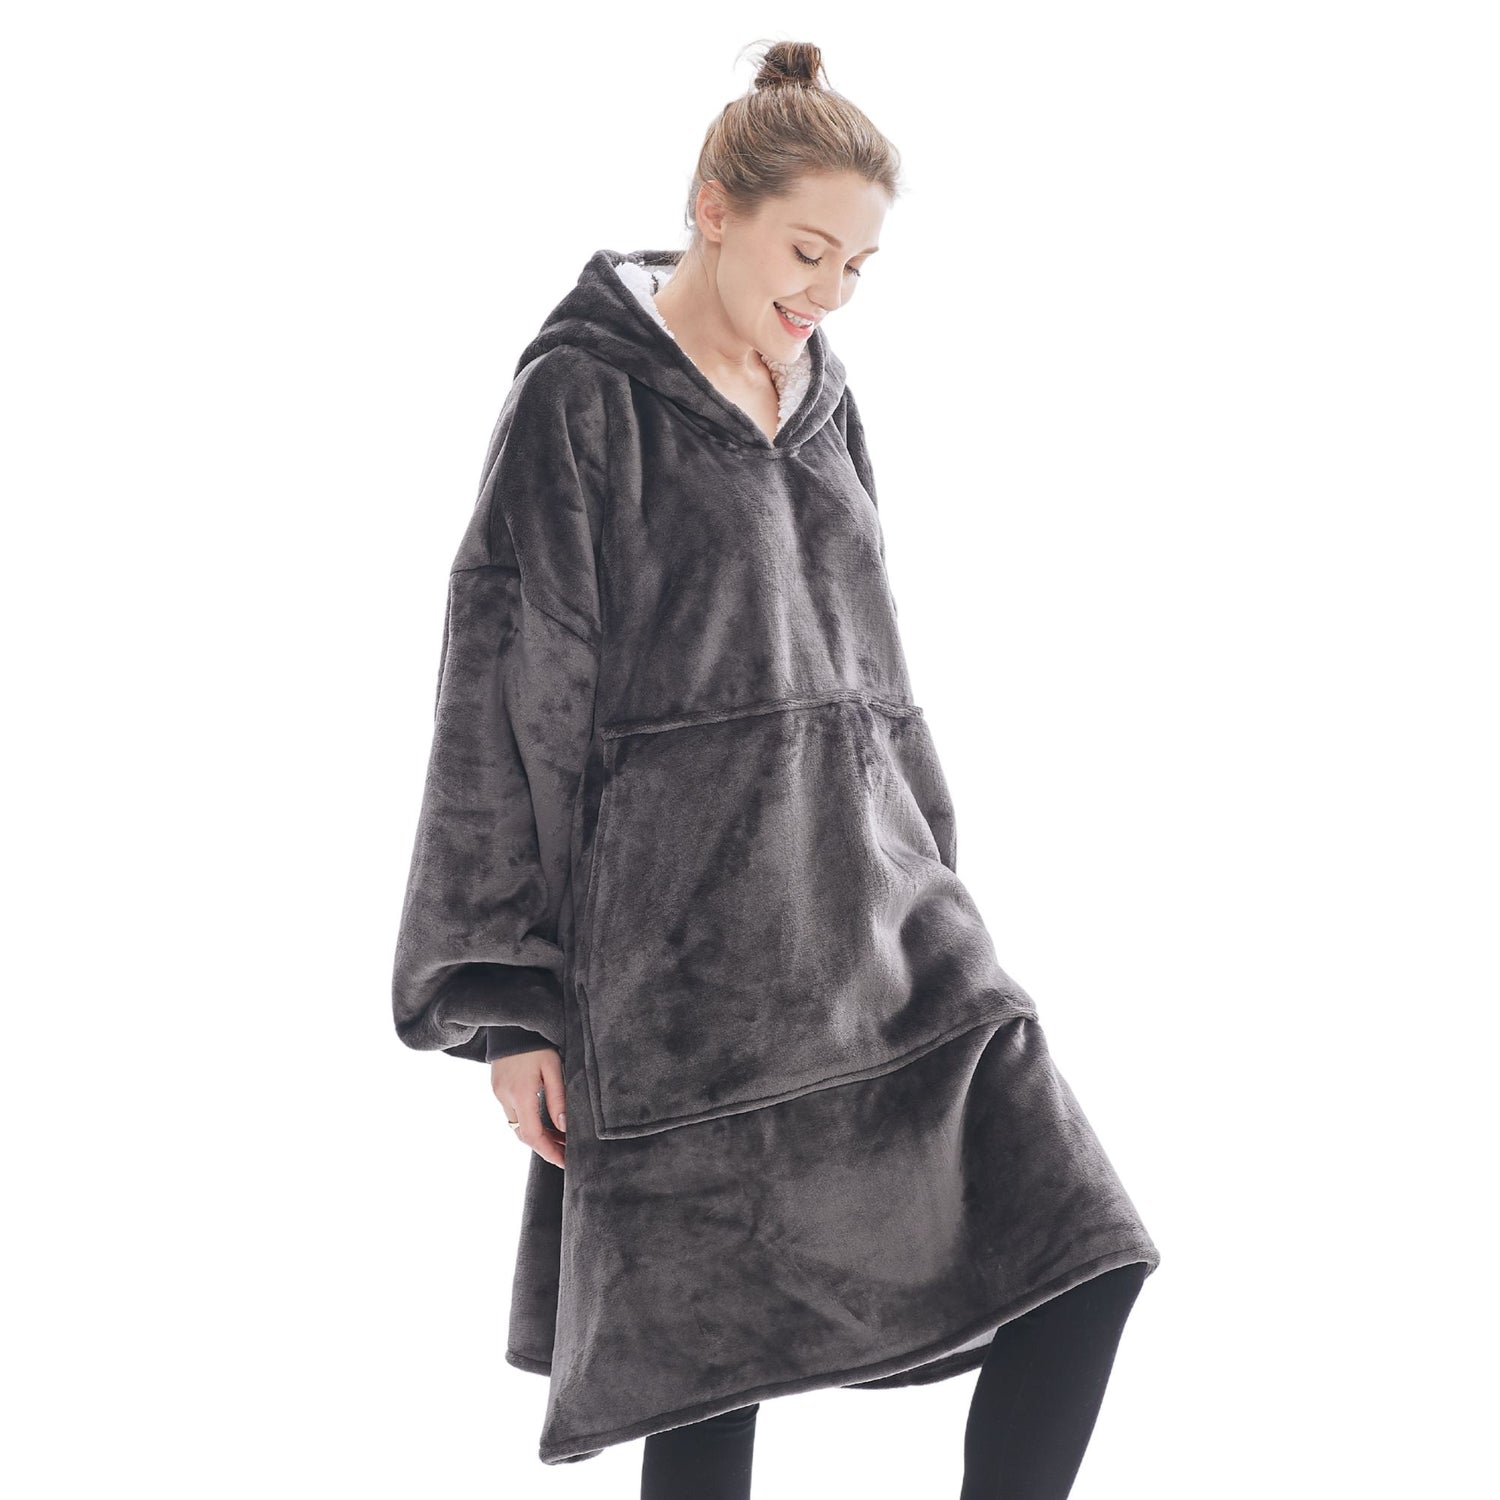 The Oversized Hoodie® grey woman hood large central pocket 